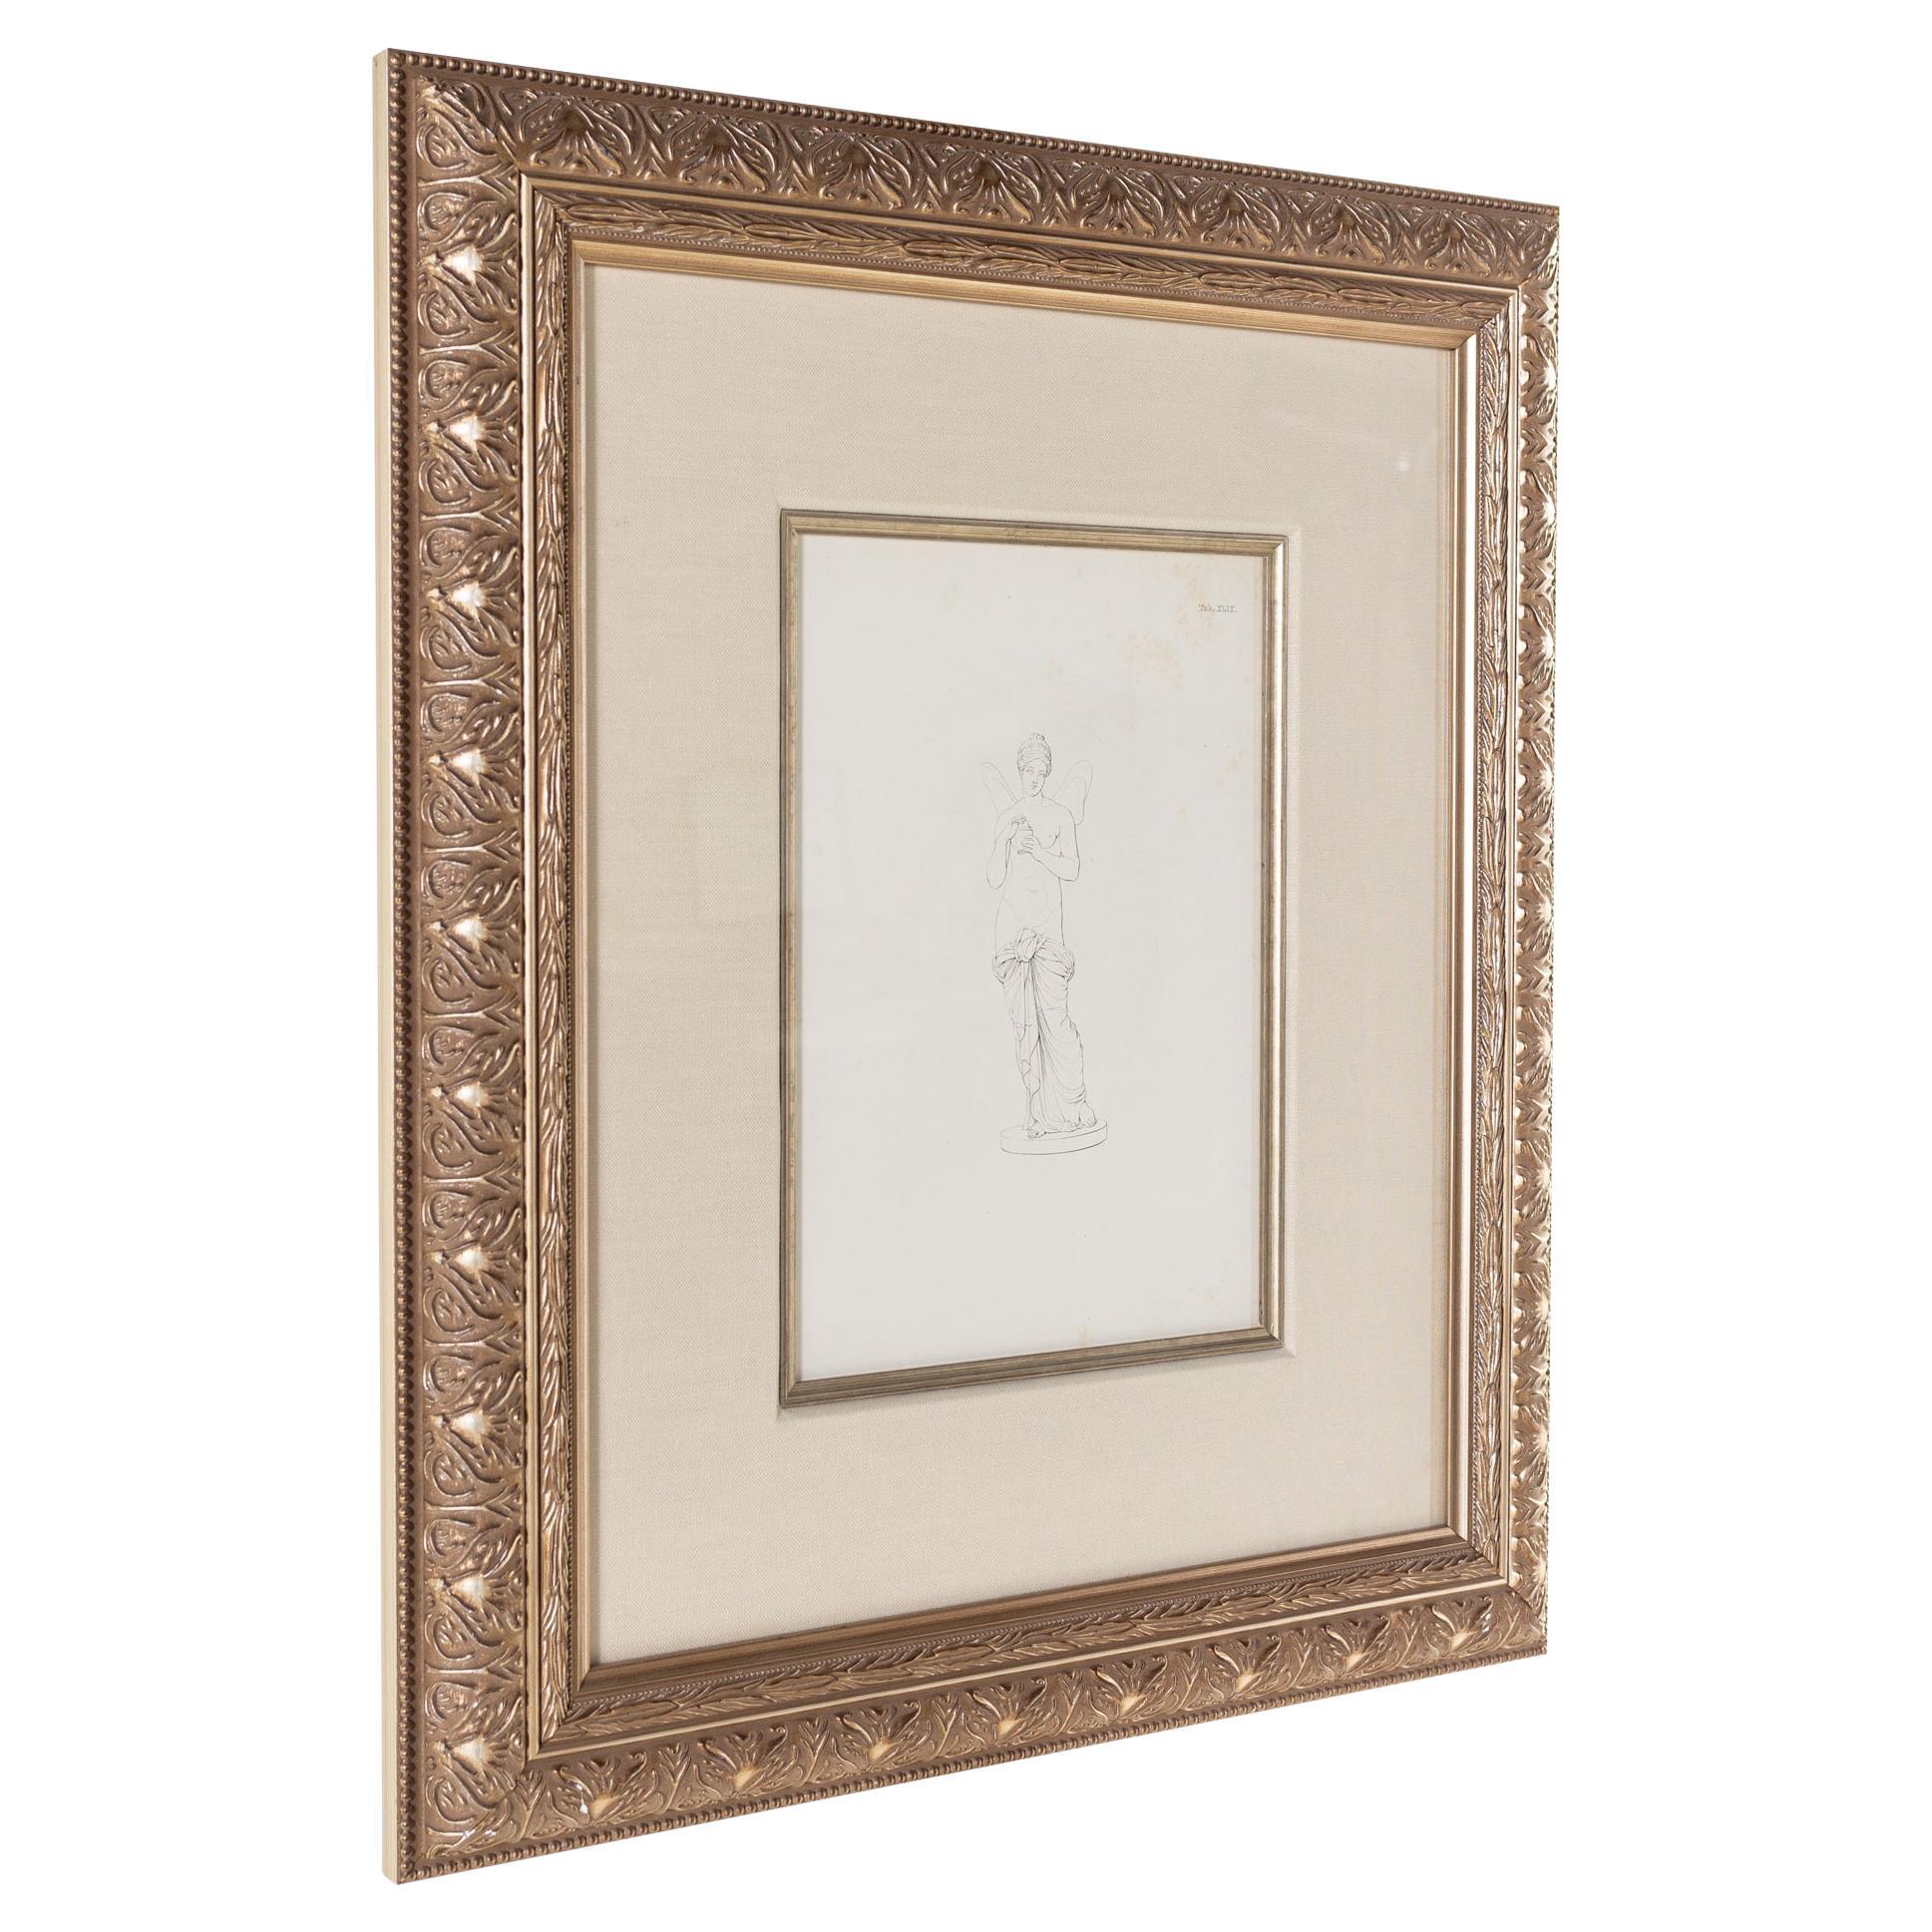 Pencil Drawing of Women Gold Framed